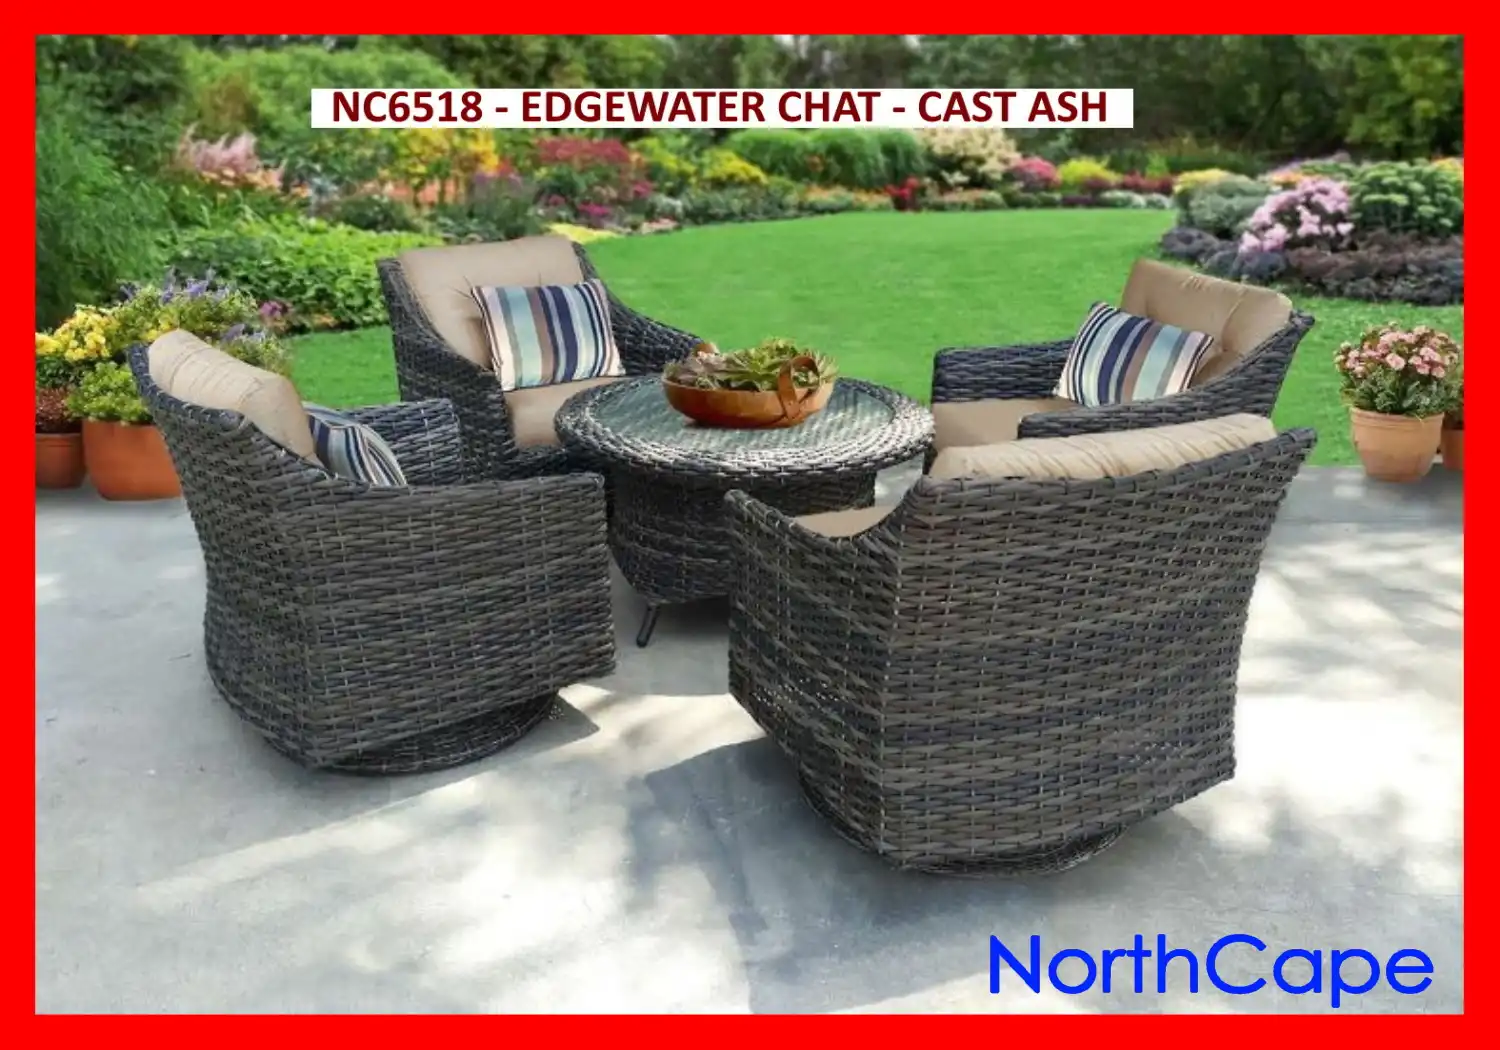 NC6518 - EDGEWATER CHAT - CAST ASH